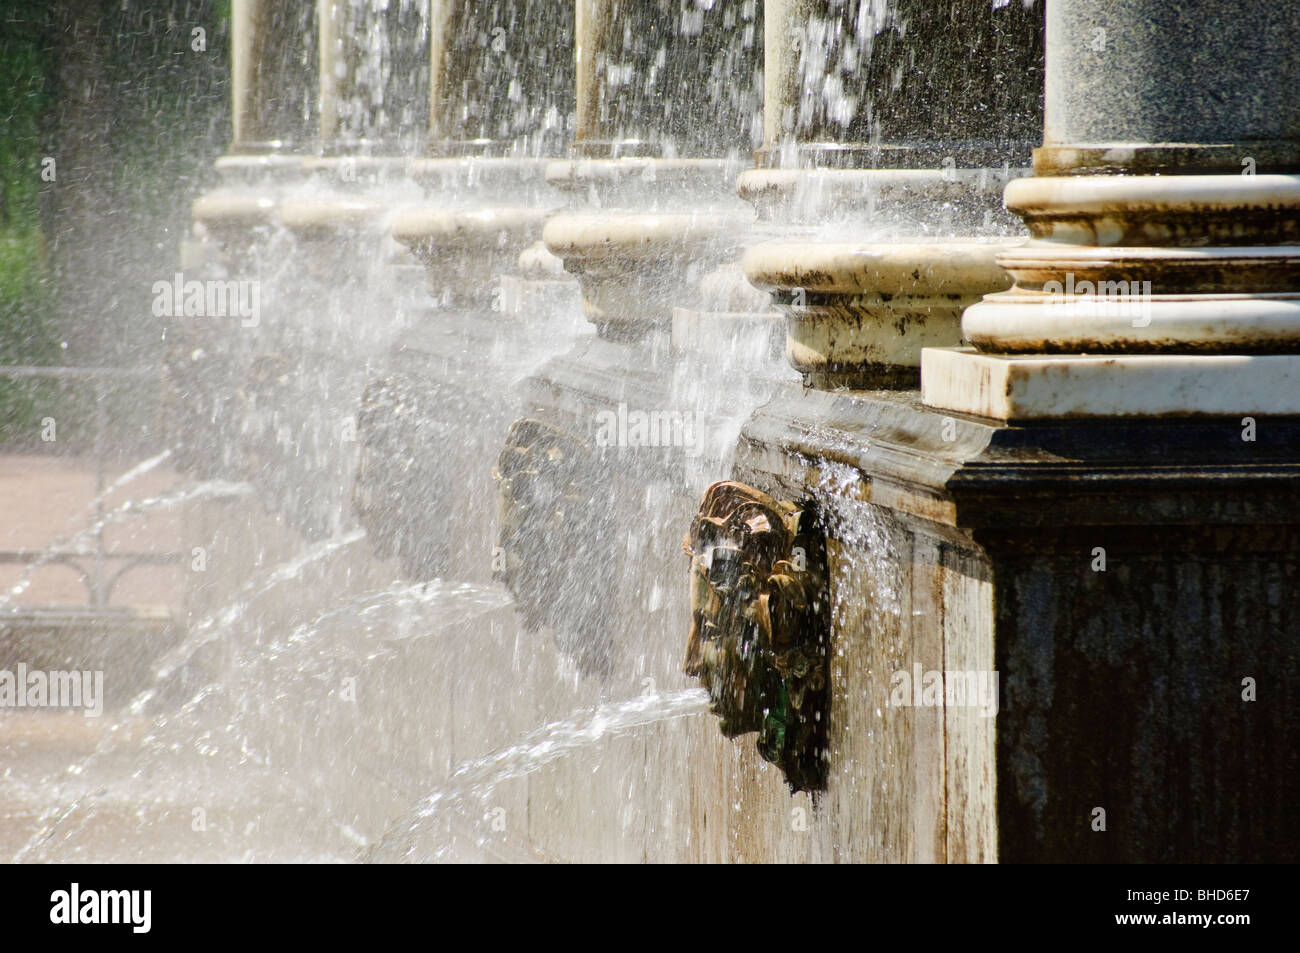 Fountains in the grounds of the former Imperial palace of Peterhof (Petrodvorets), St Petersburg, Russia Stock Photo